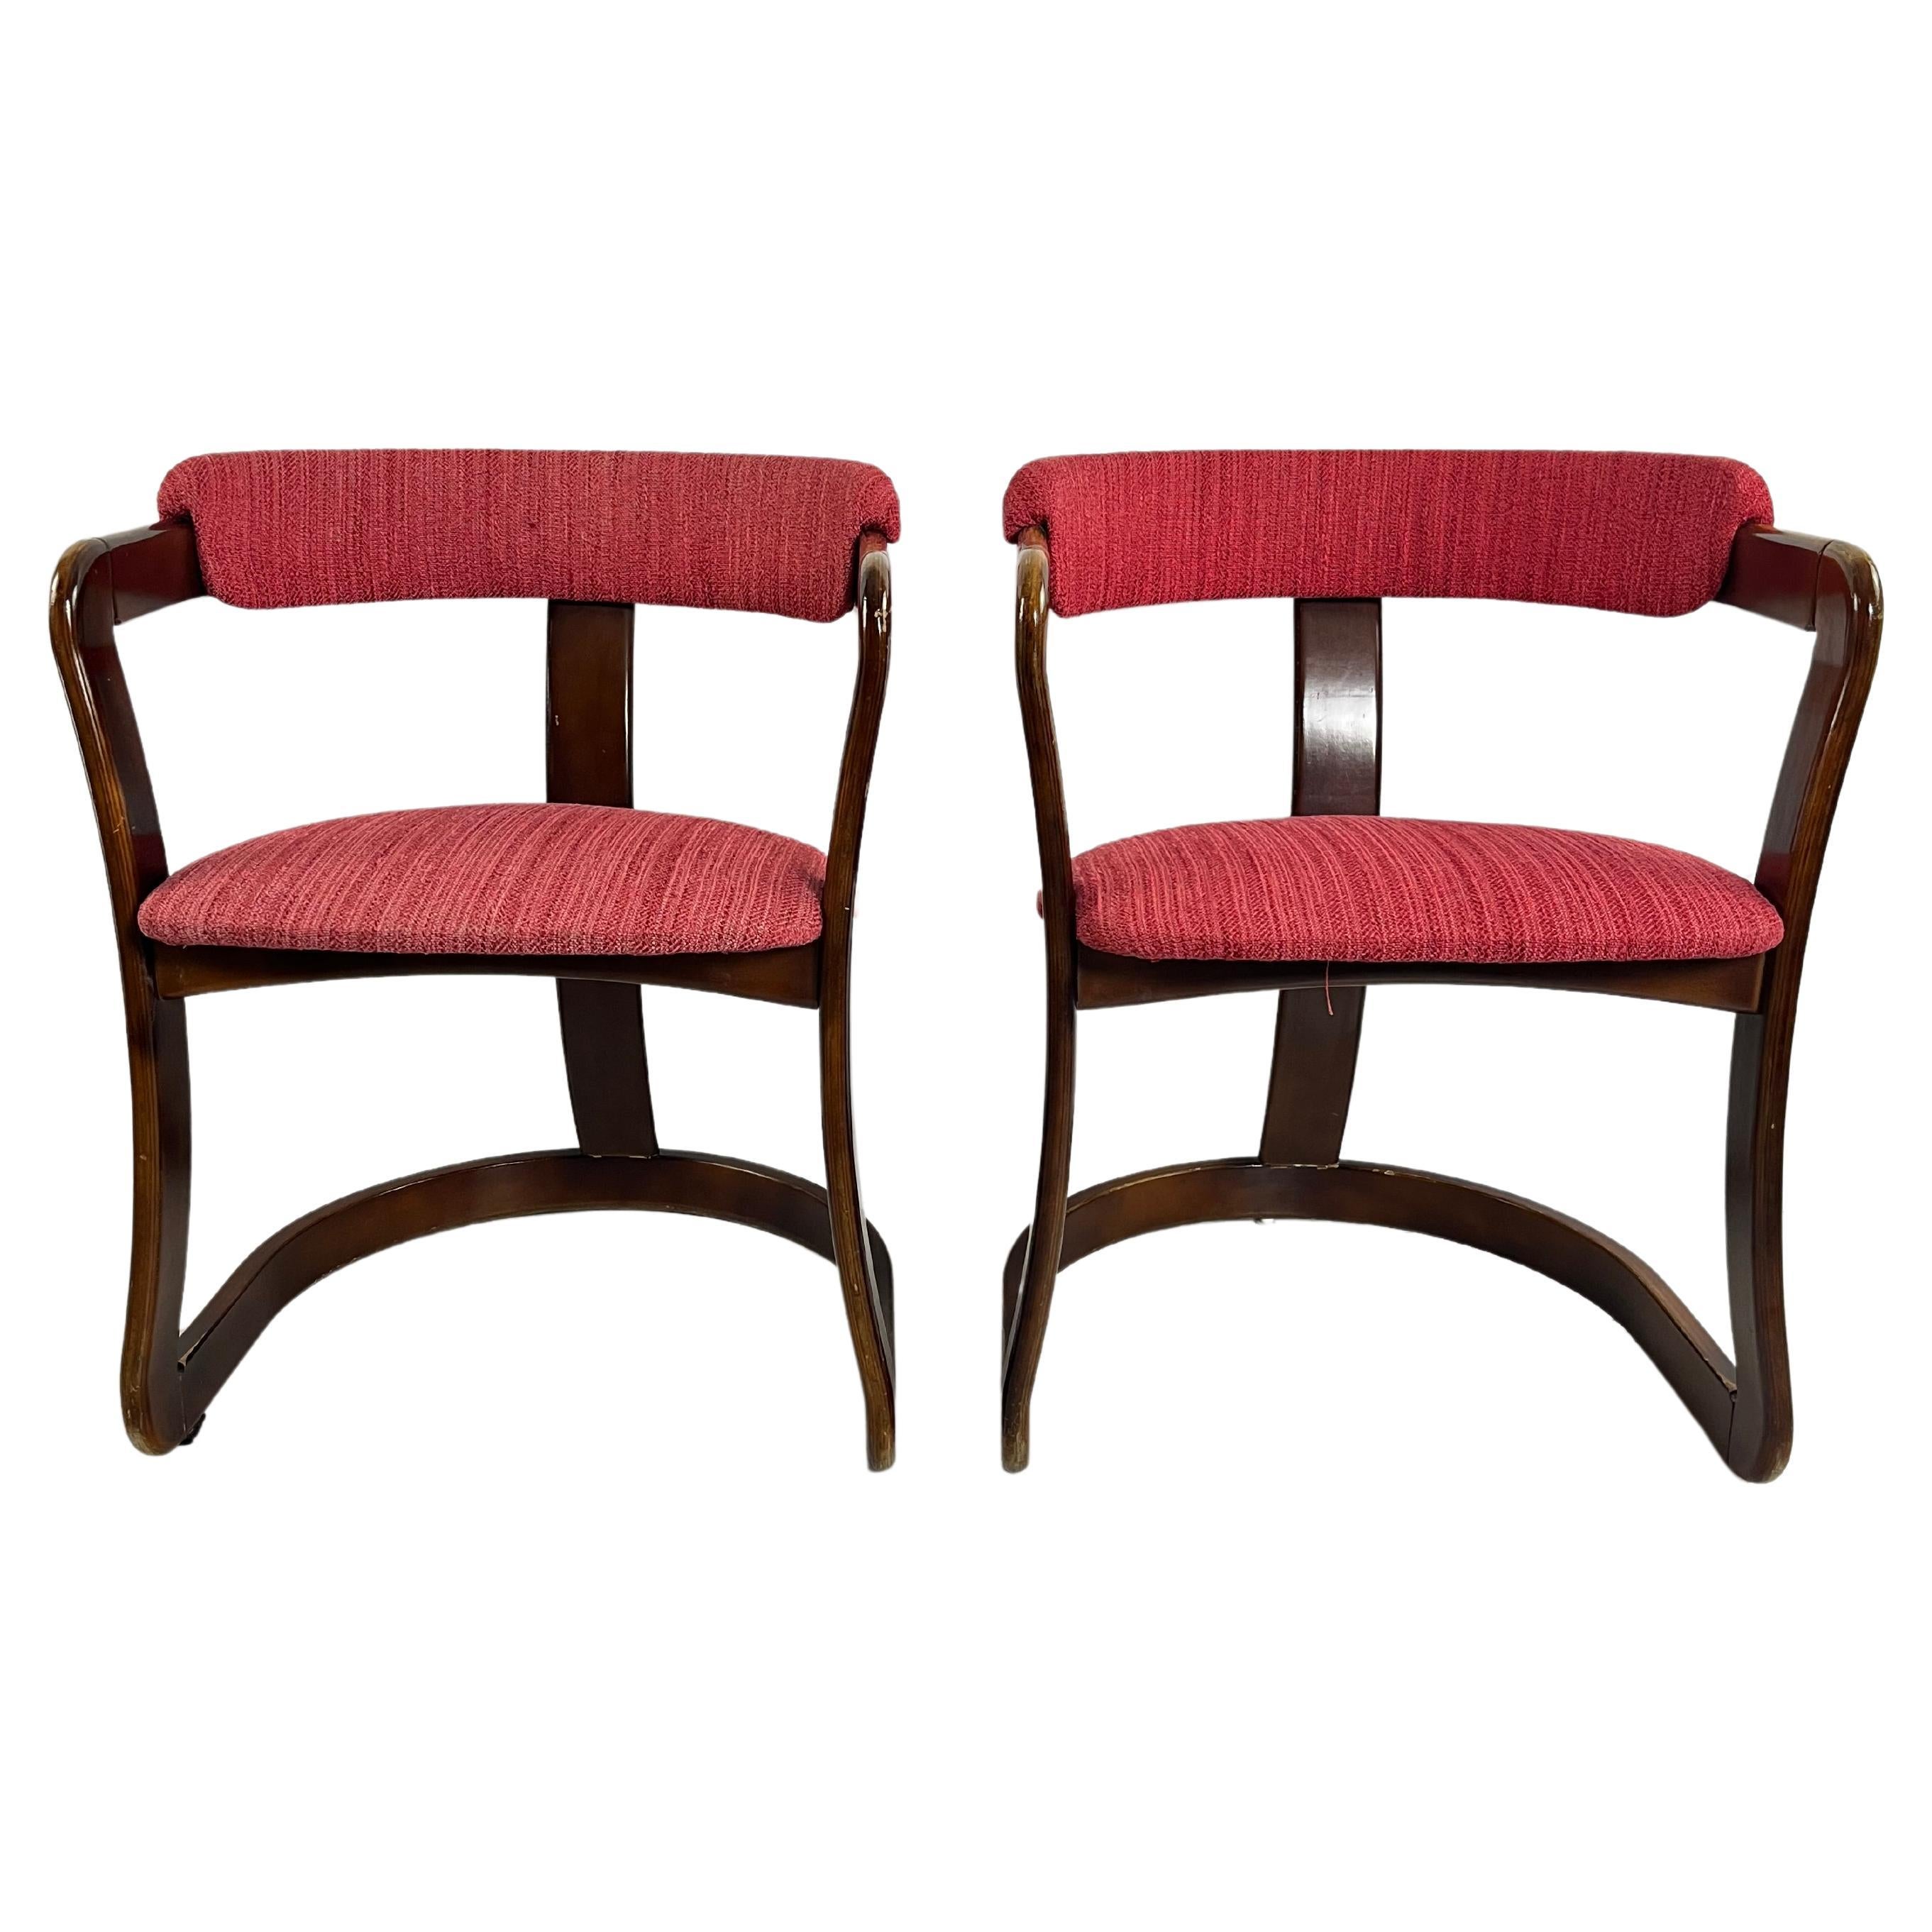 Set of 2 Mid-Century Curved Wooden Chairs Attributed to A. & P. Castiglioni